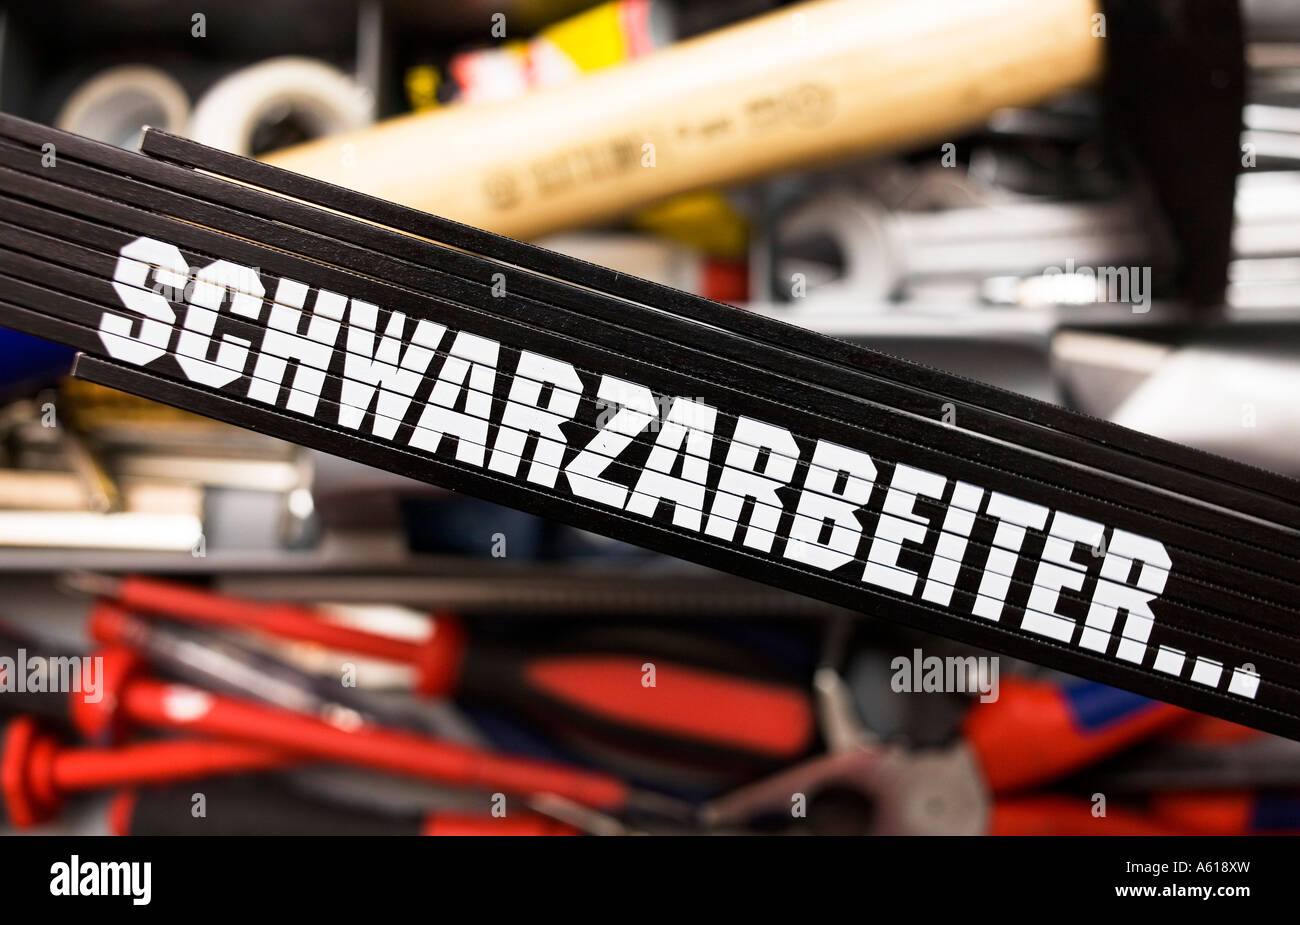 Black folding rule with writing 'schwarzarbeiter' in front of a tool box Stock Photo